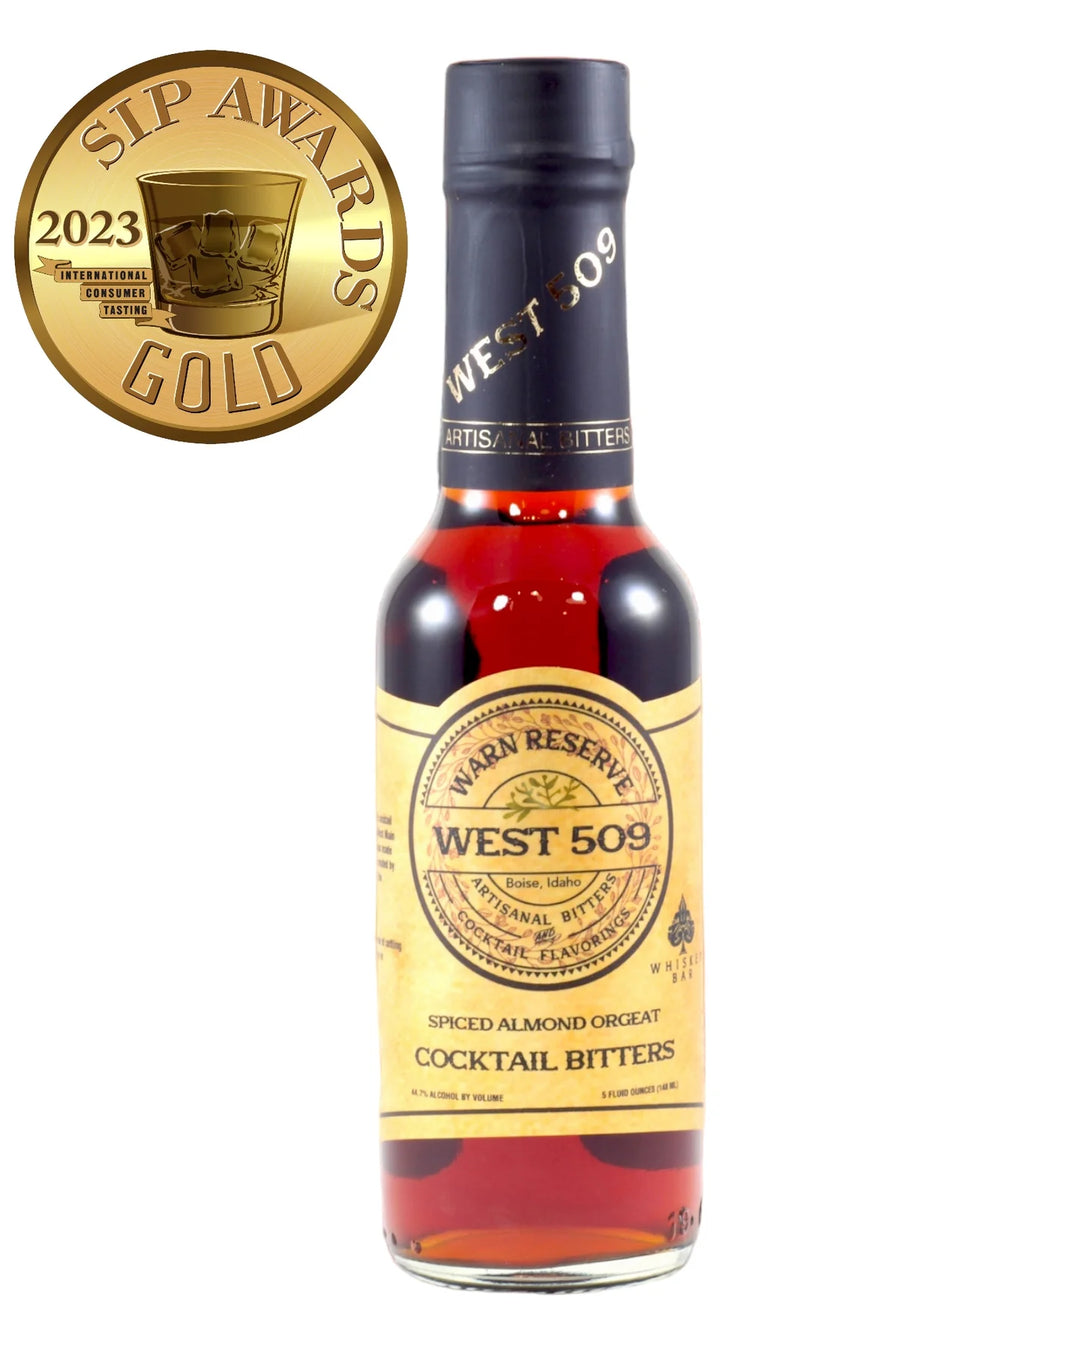 Image of Warn Reserve West 509 Bitters